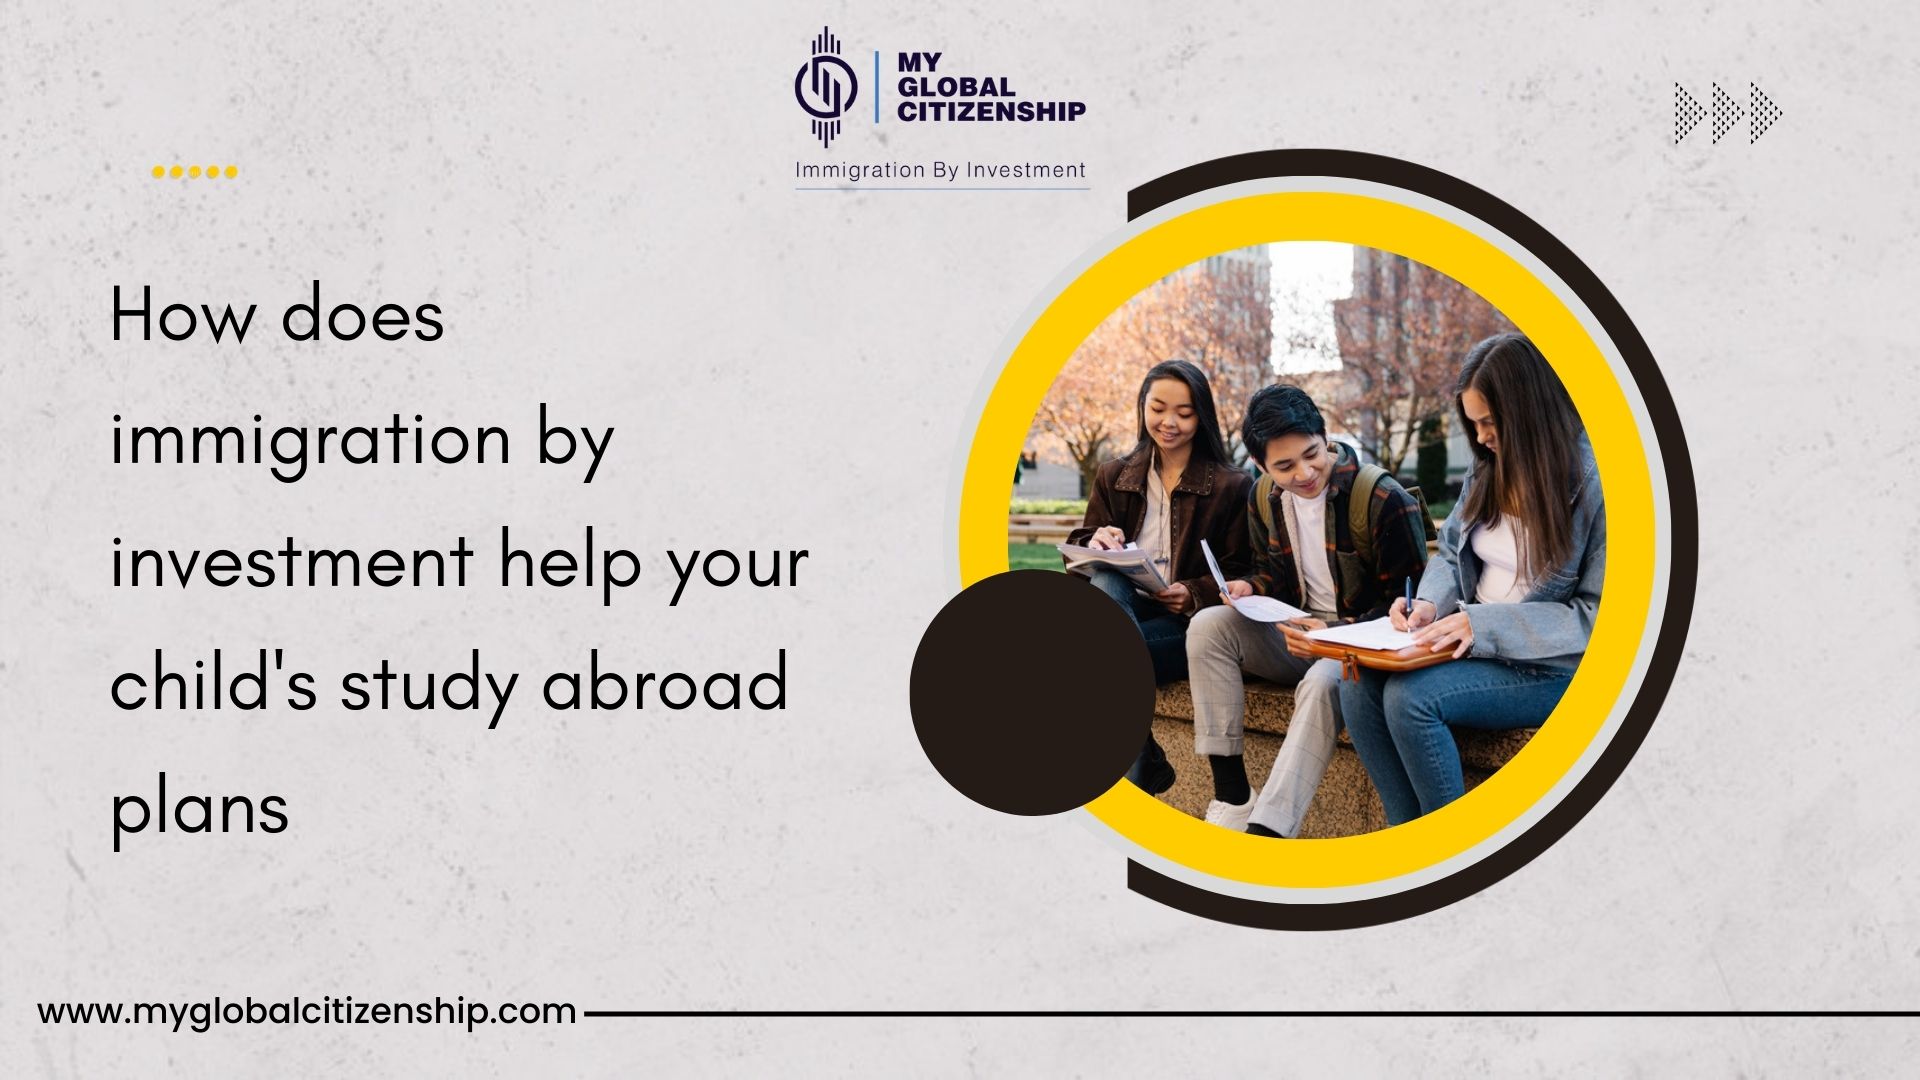 How does immigration by investment help your child’s study abroad plans